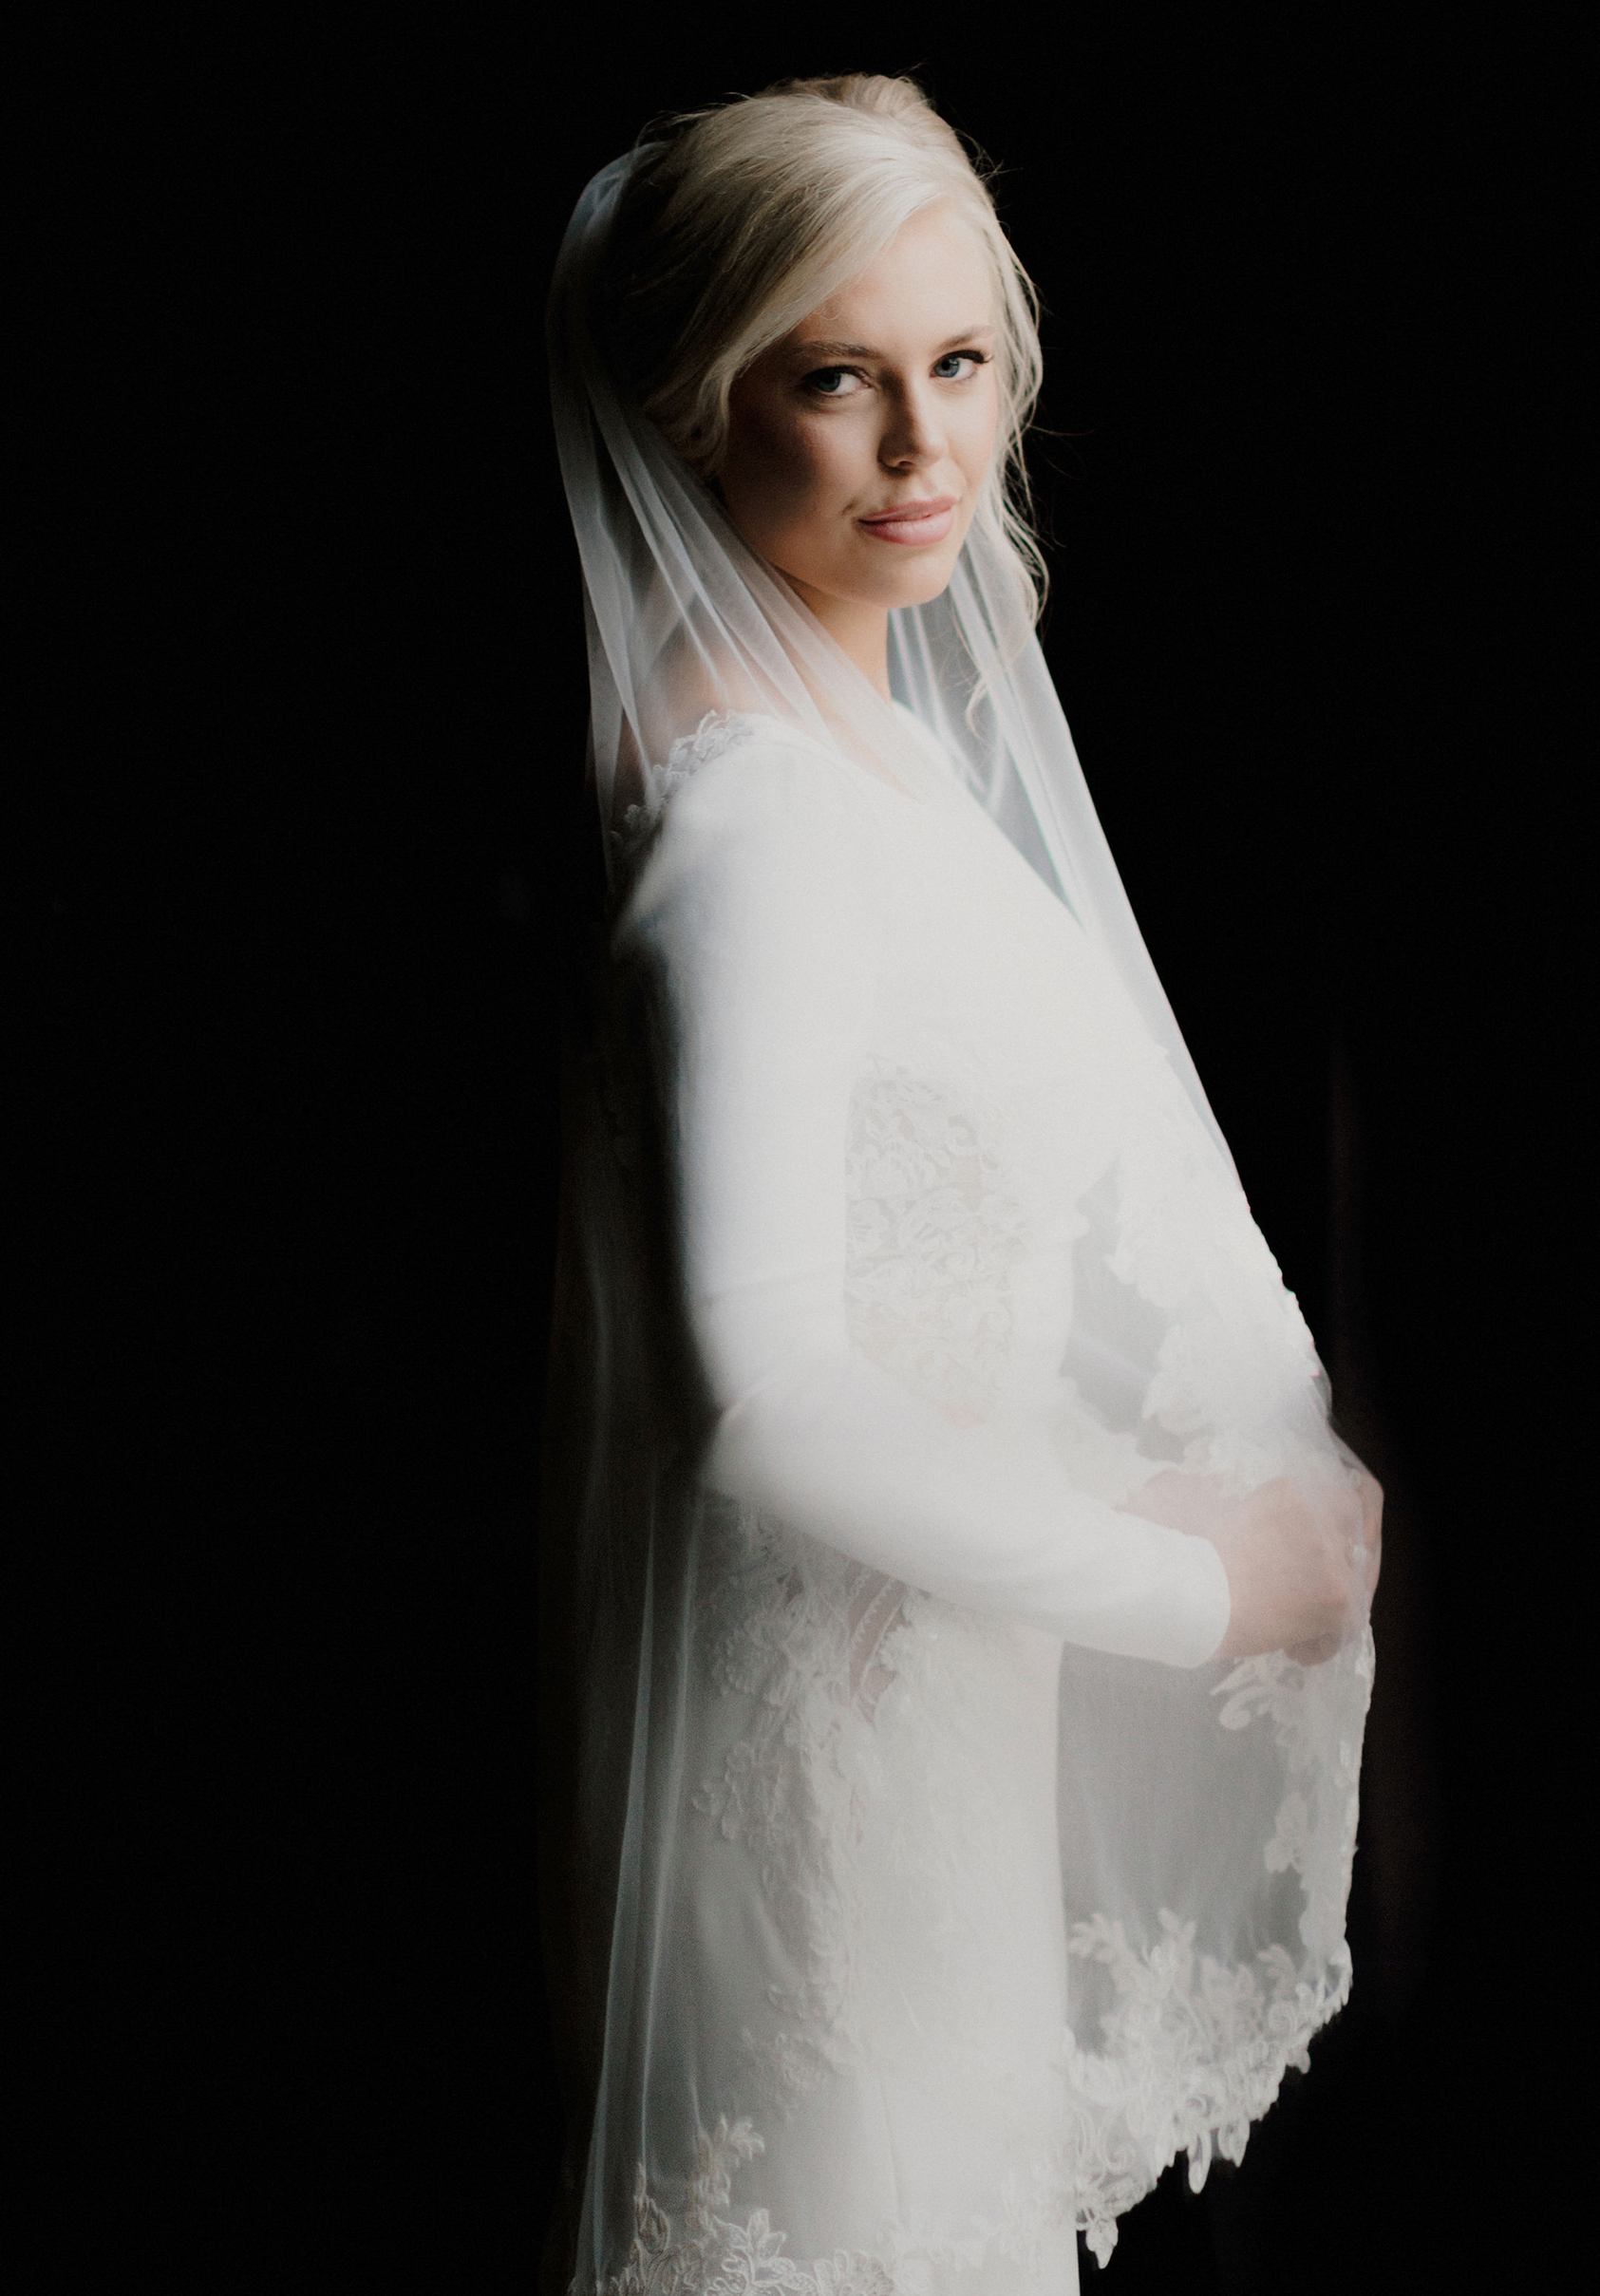 A bride wears her wedding gown and veil against a black background.